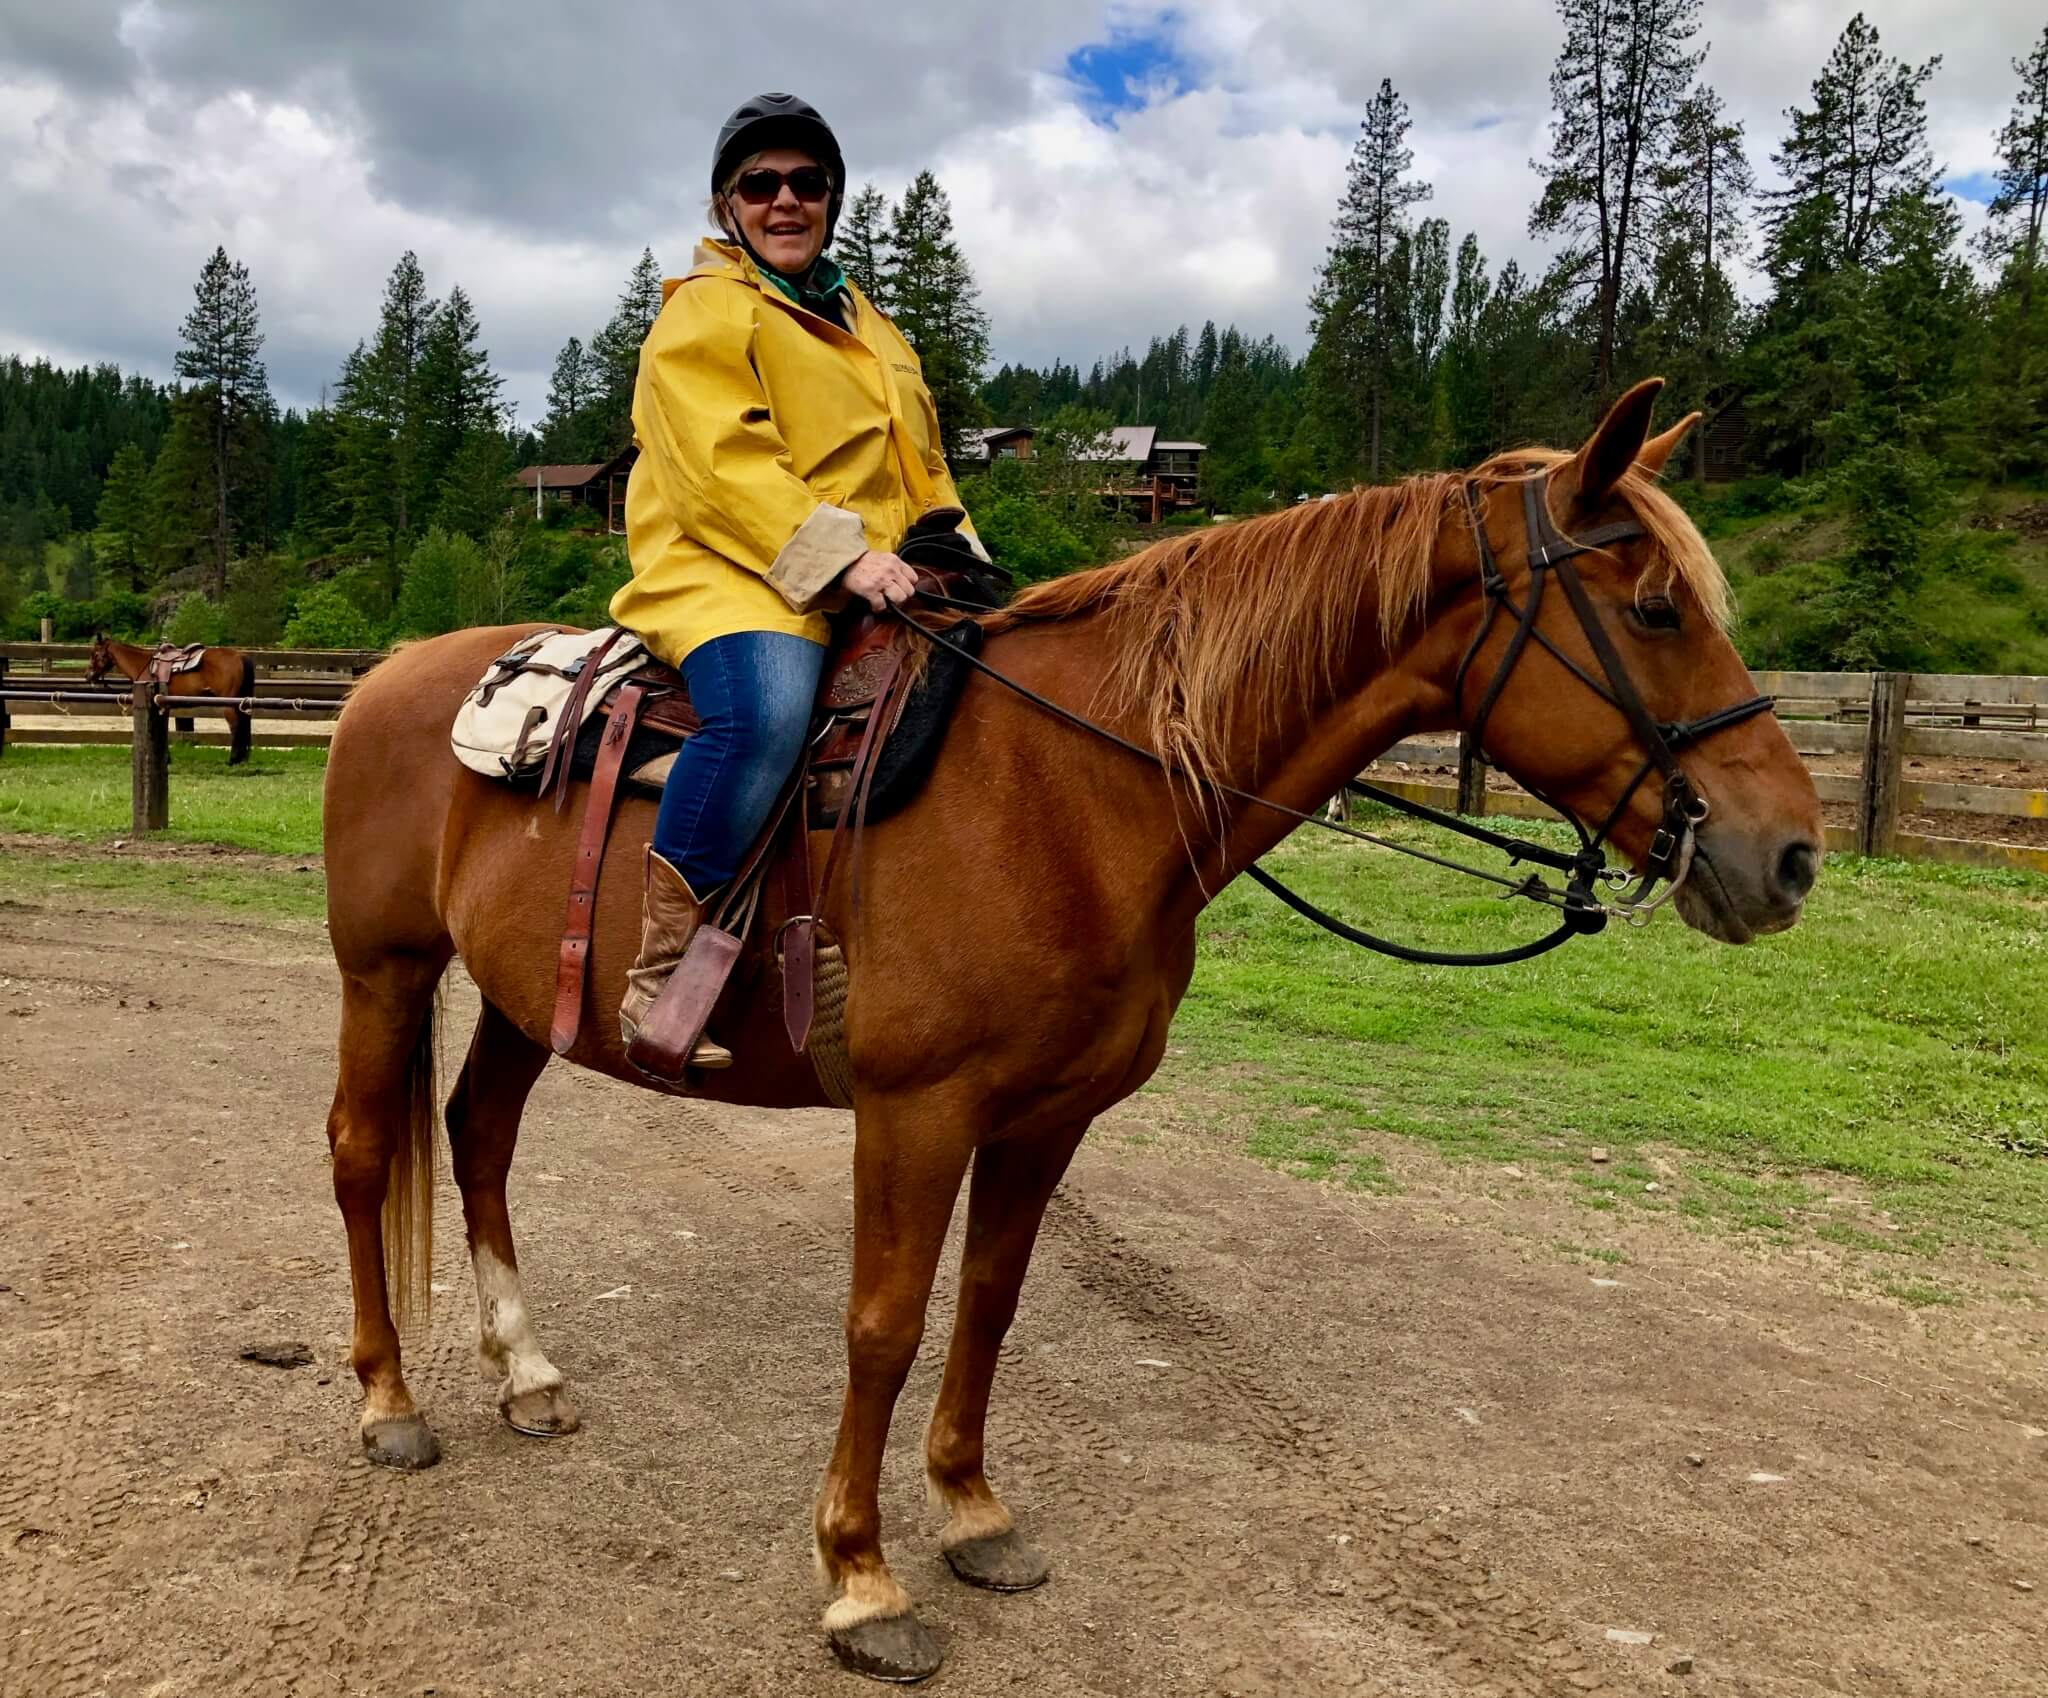 A seasoned wrangler smiles with glee while enjoying an adult getaway at Red Horse Mountain Ranch outside of Harrison, ID.